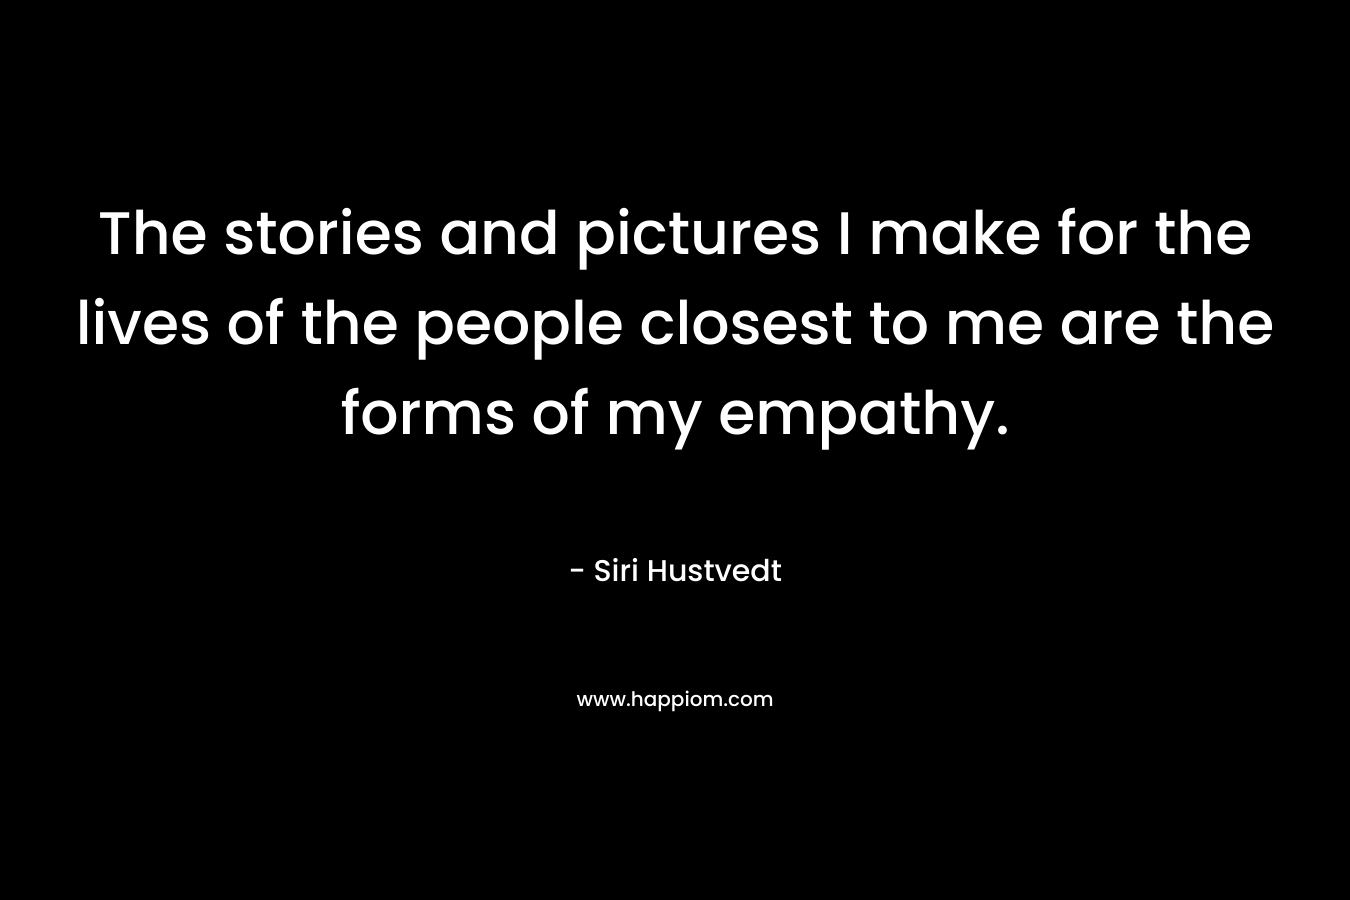 The stories and pictures I make for the lives of the people closest to me are the forms of my empathy. – Siri Hustvedt